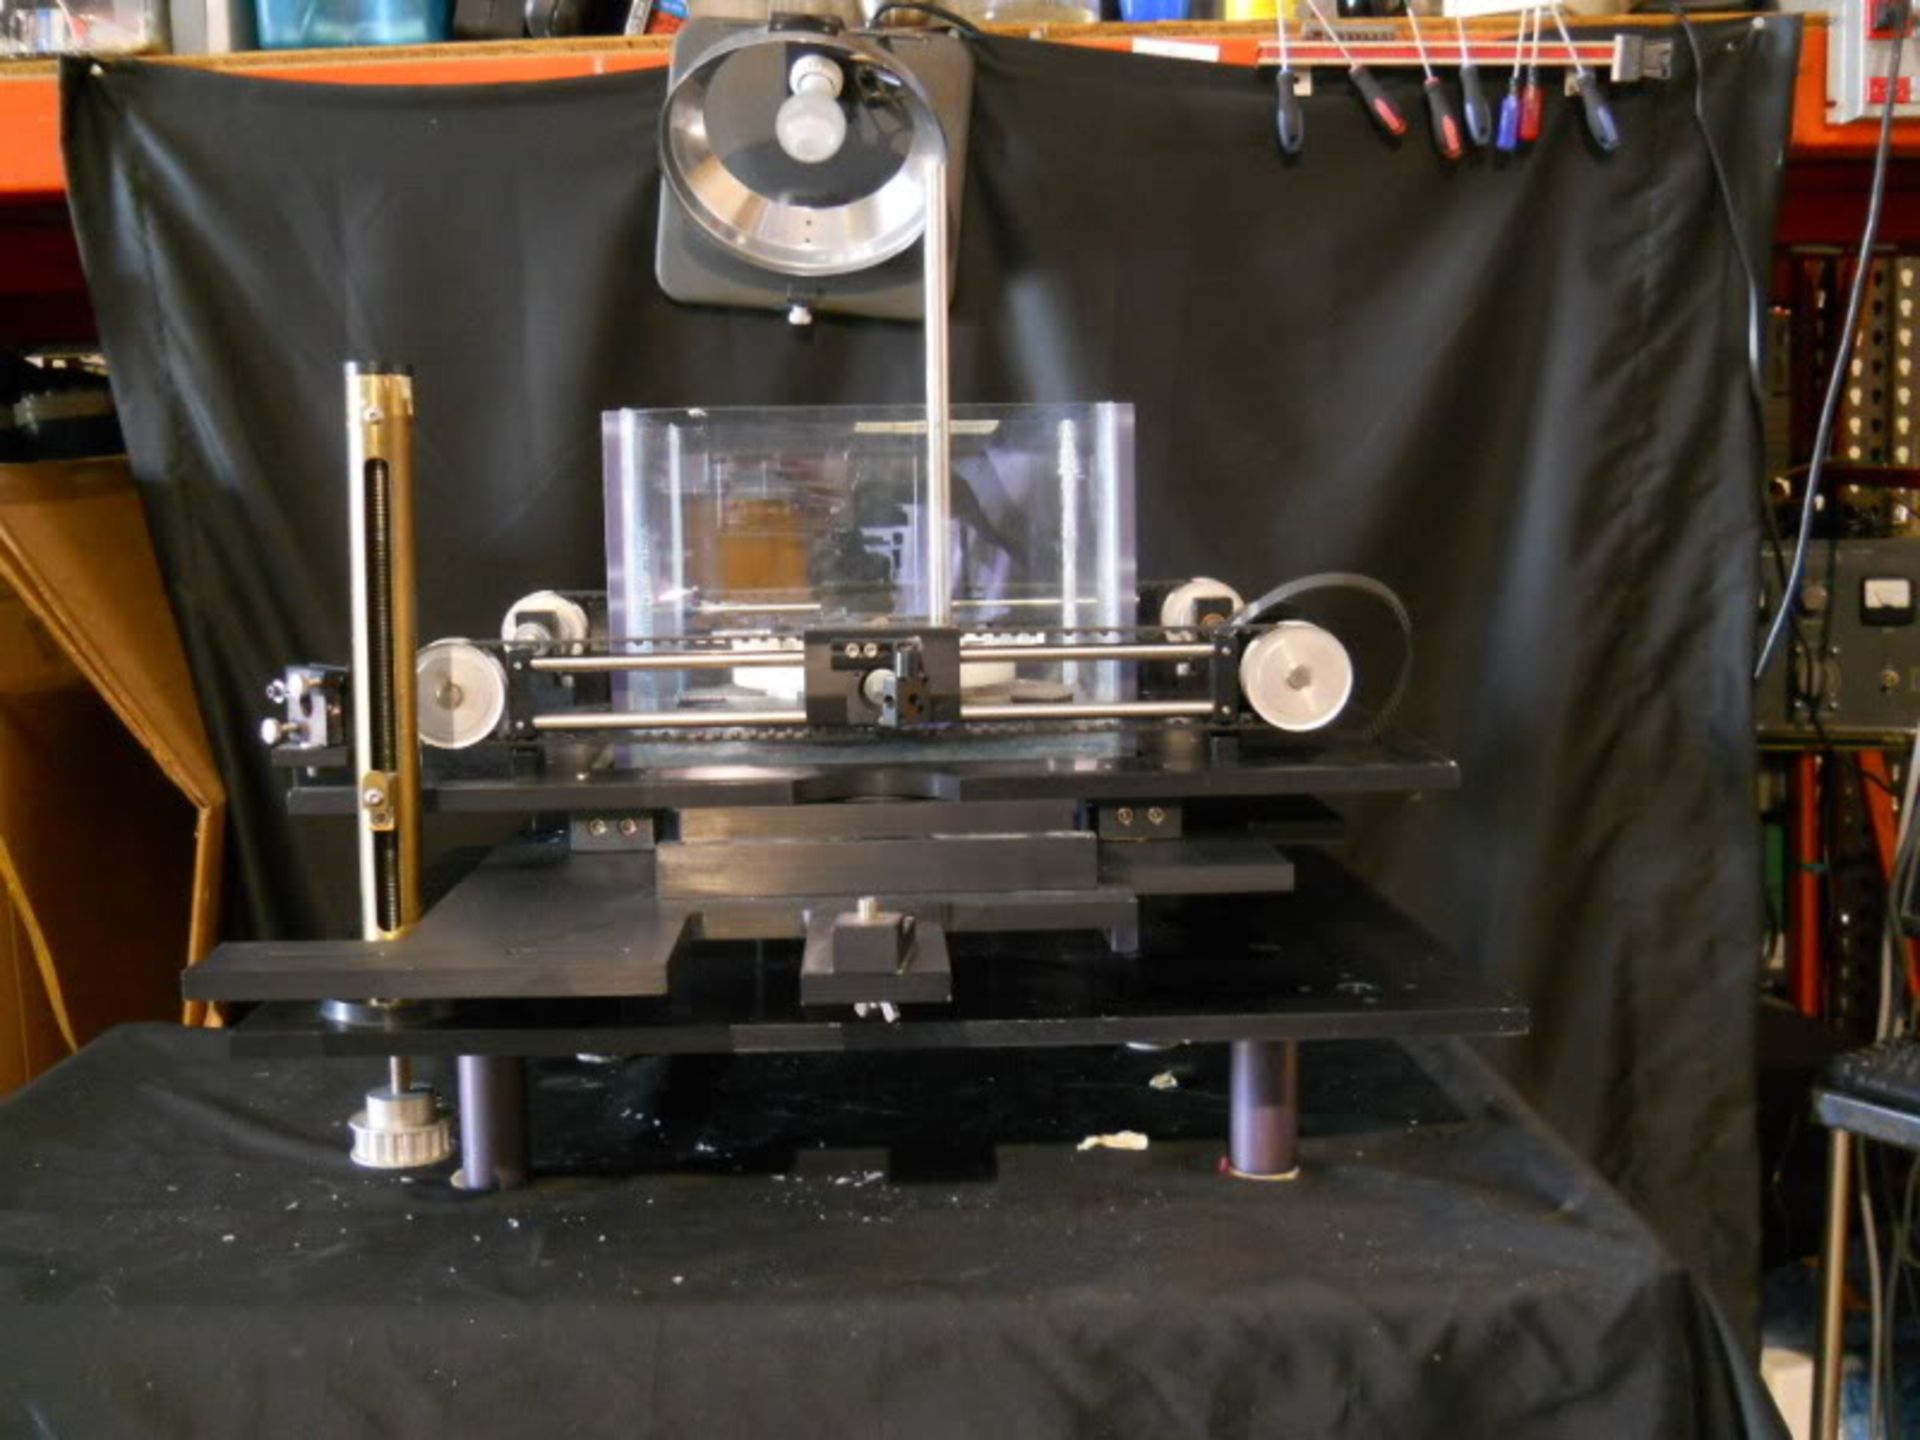 Laser Positioning Stage Table Panel Parker Belt Driven Actuated X Y Z XYZ Axis, Qty 1, 321462136313 - Image 15 of 18